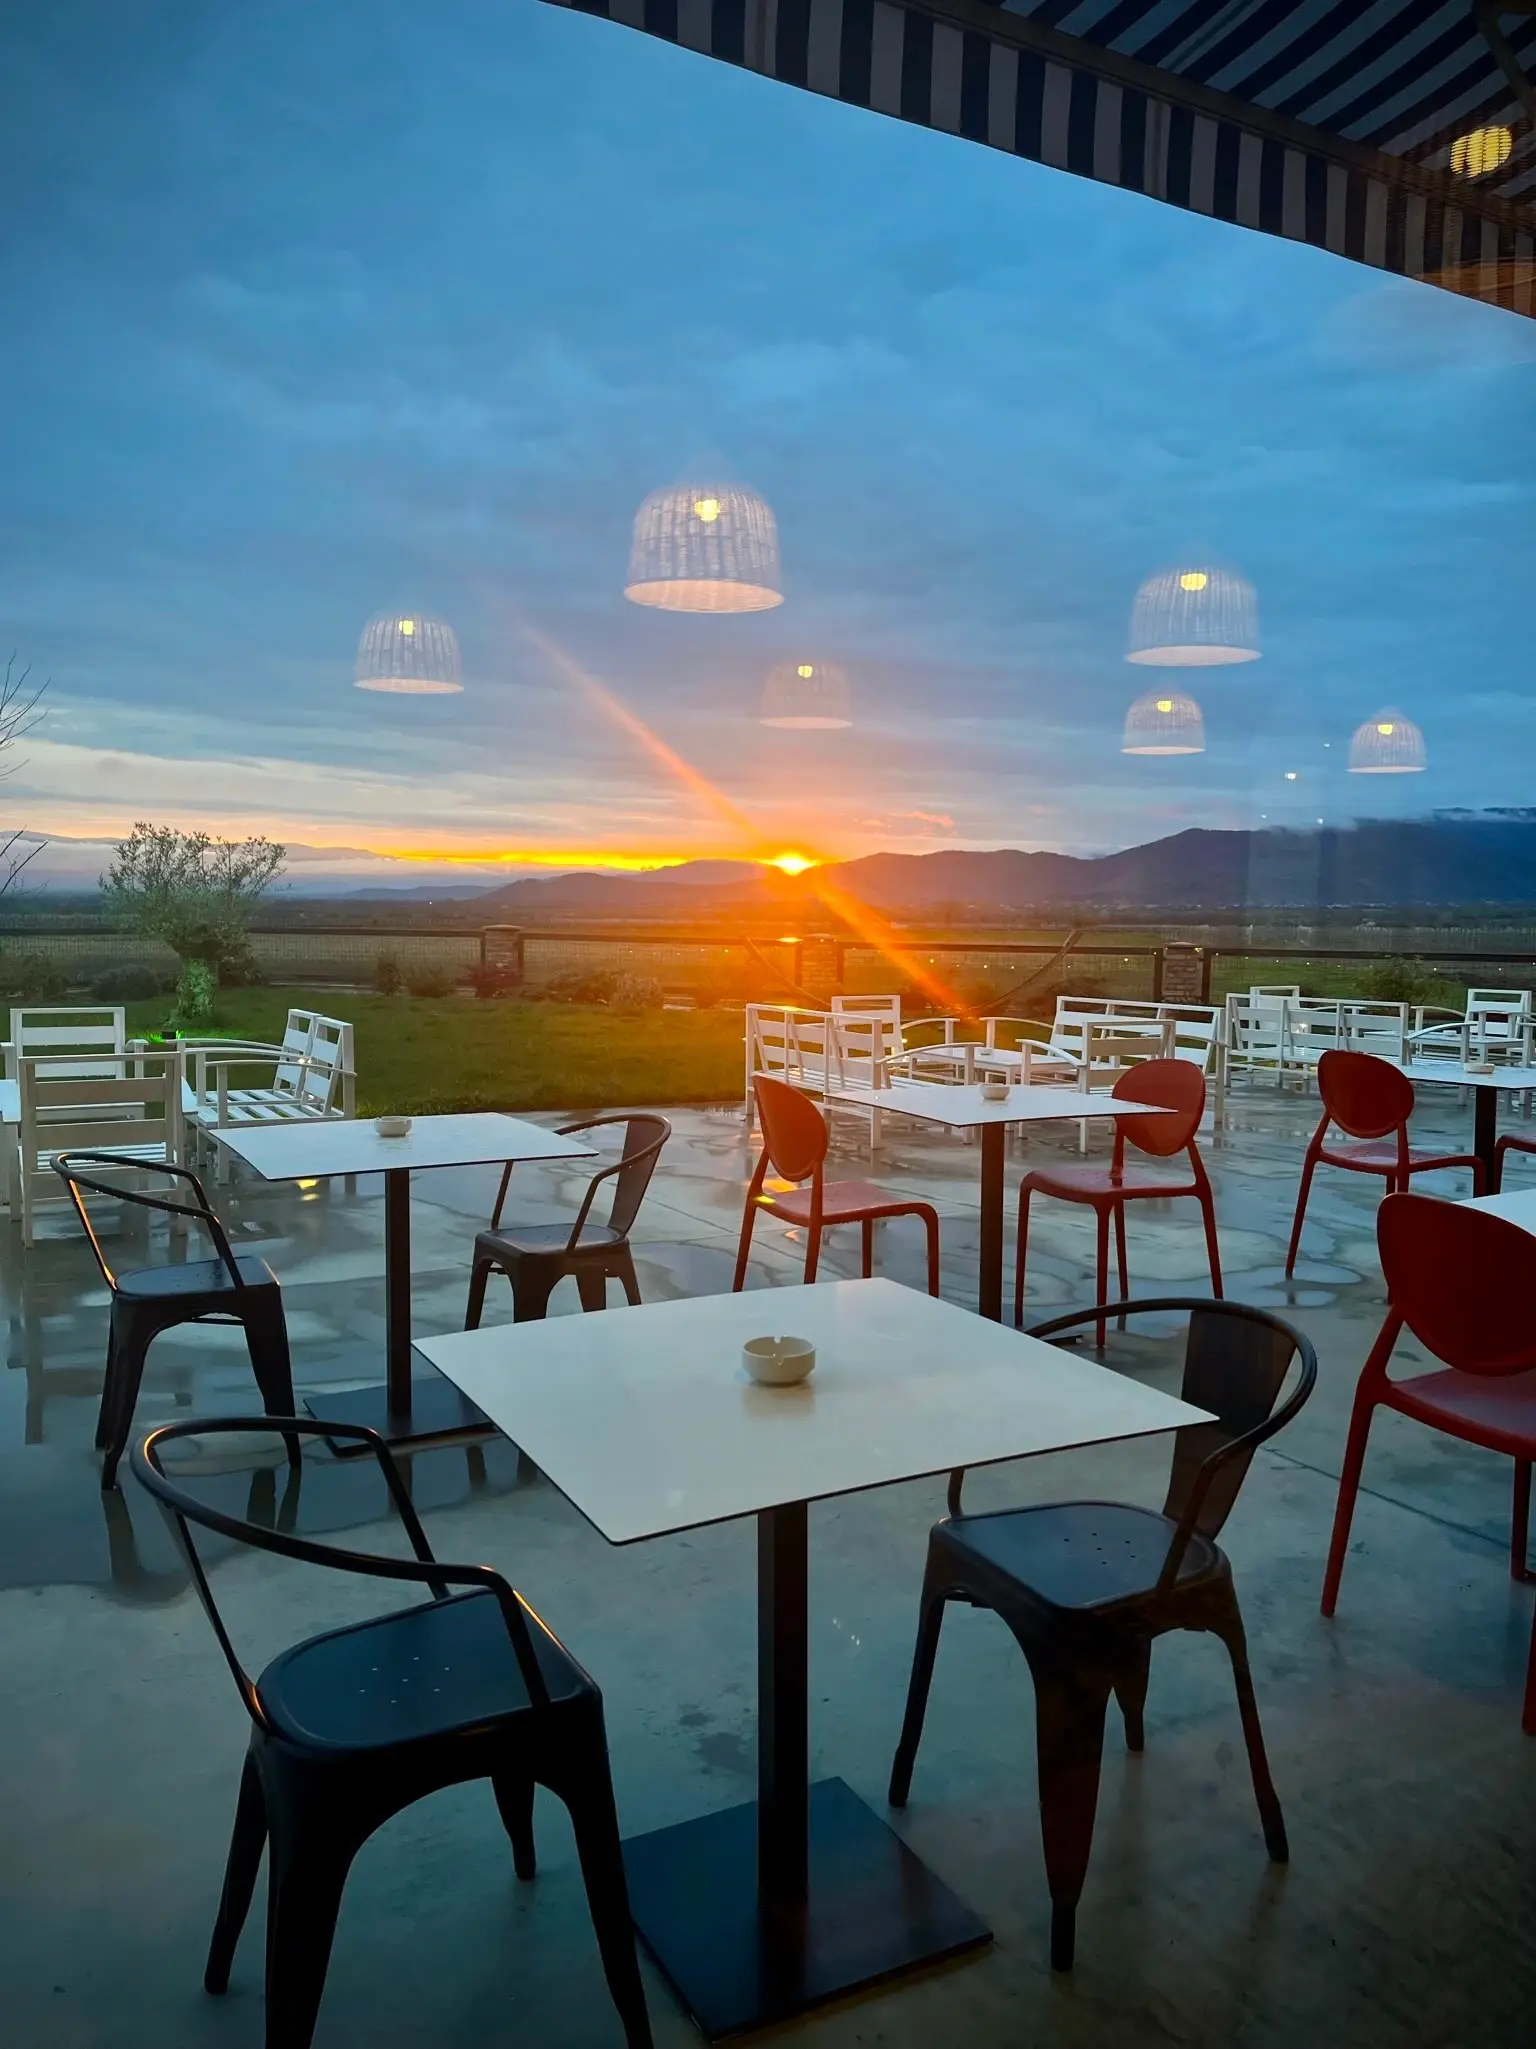 Sunset of cafe tables in Georgia